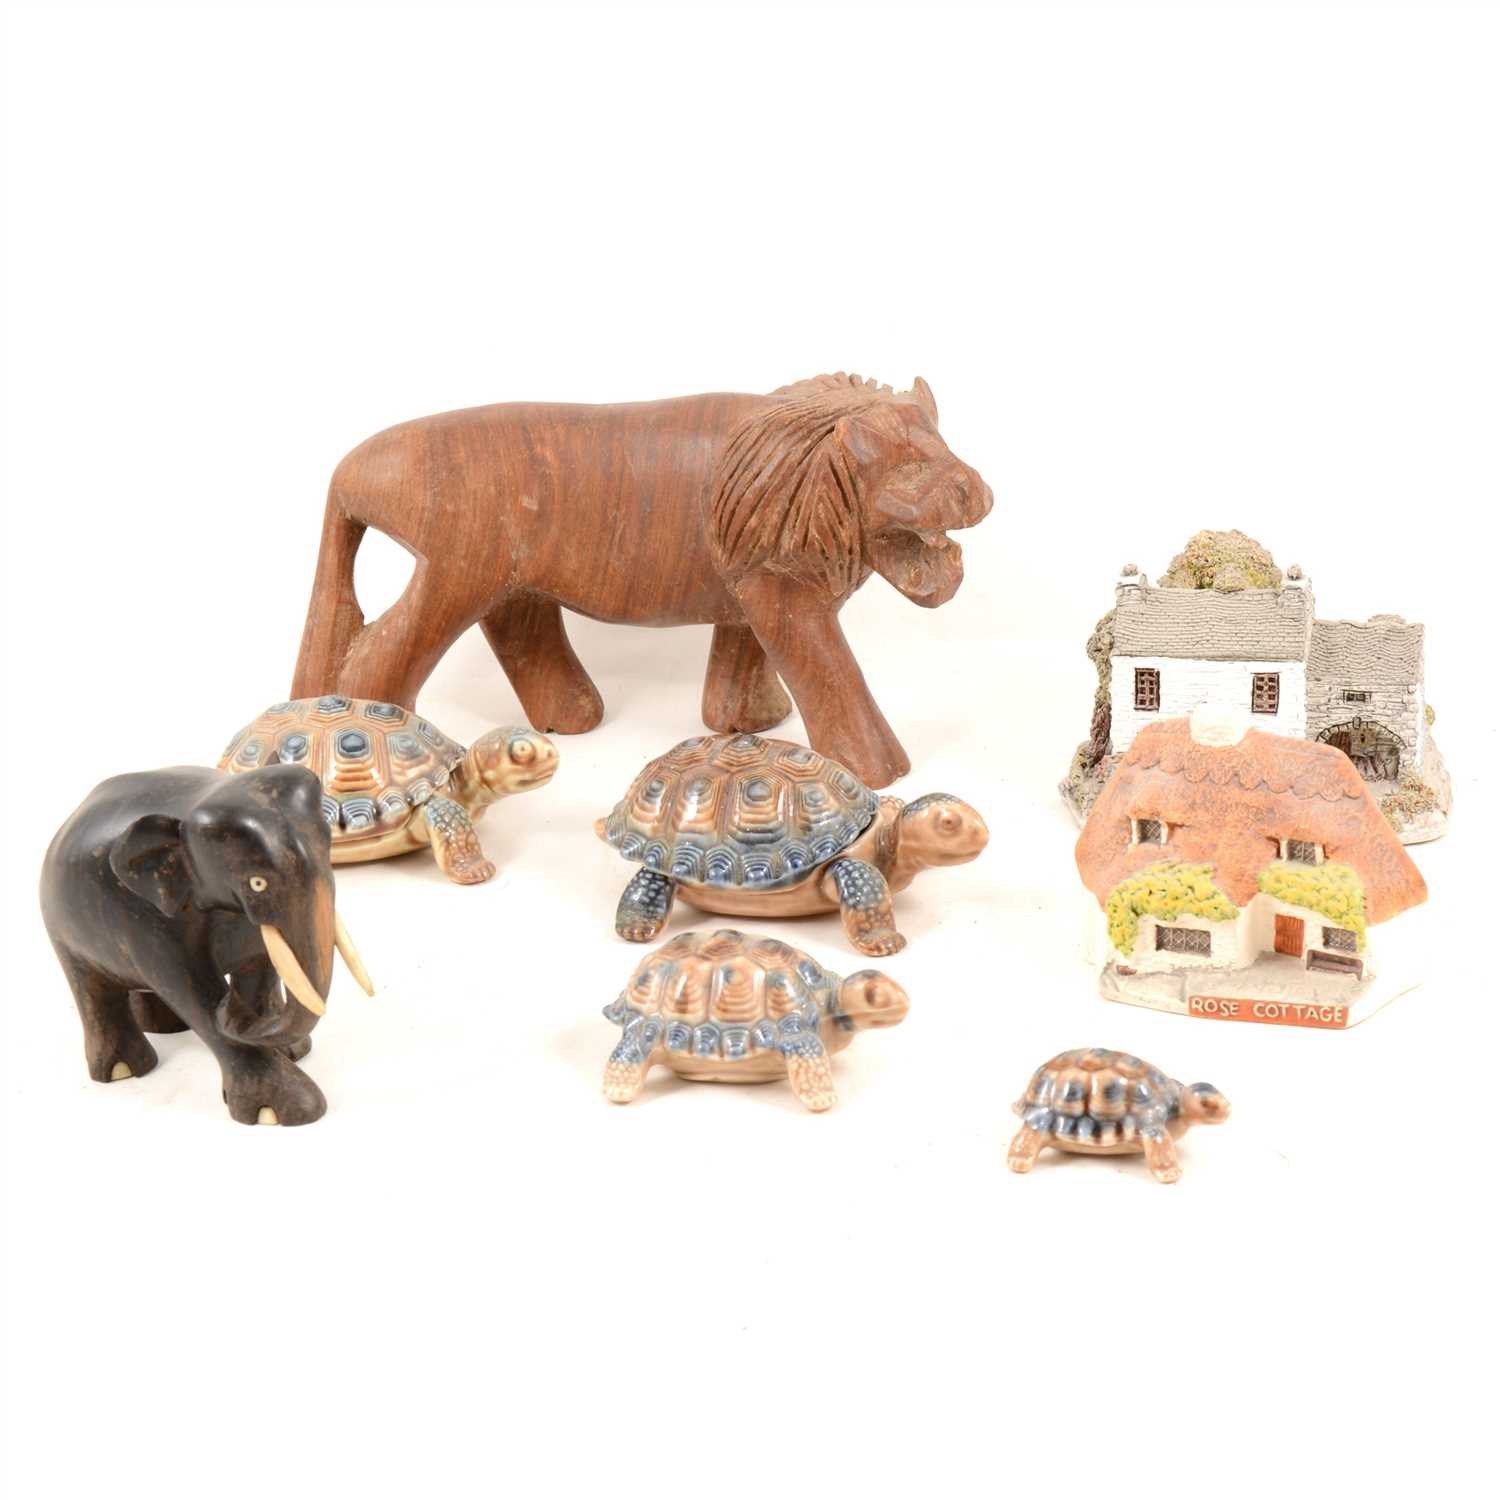 Lot 223 - Collection of carved wood animal models